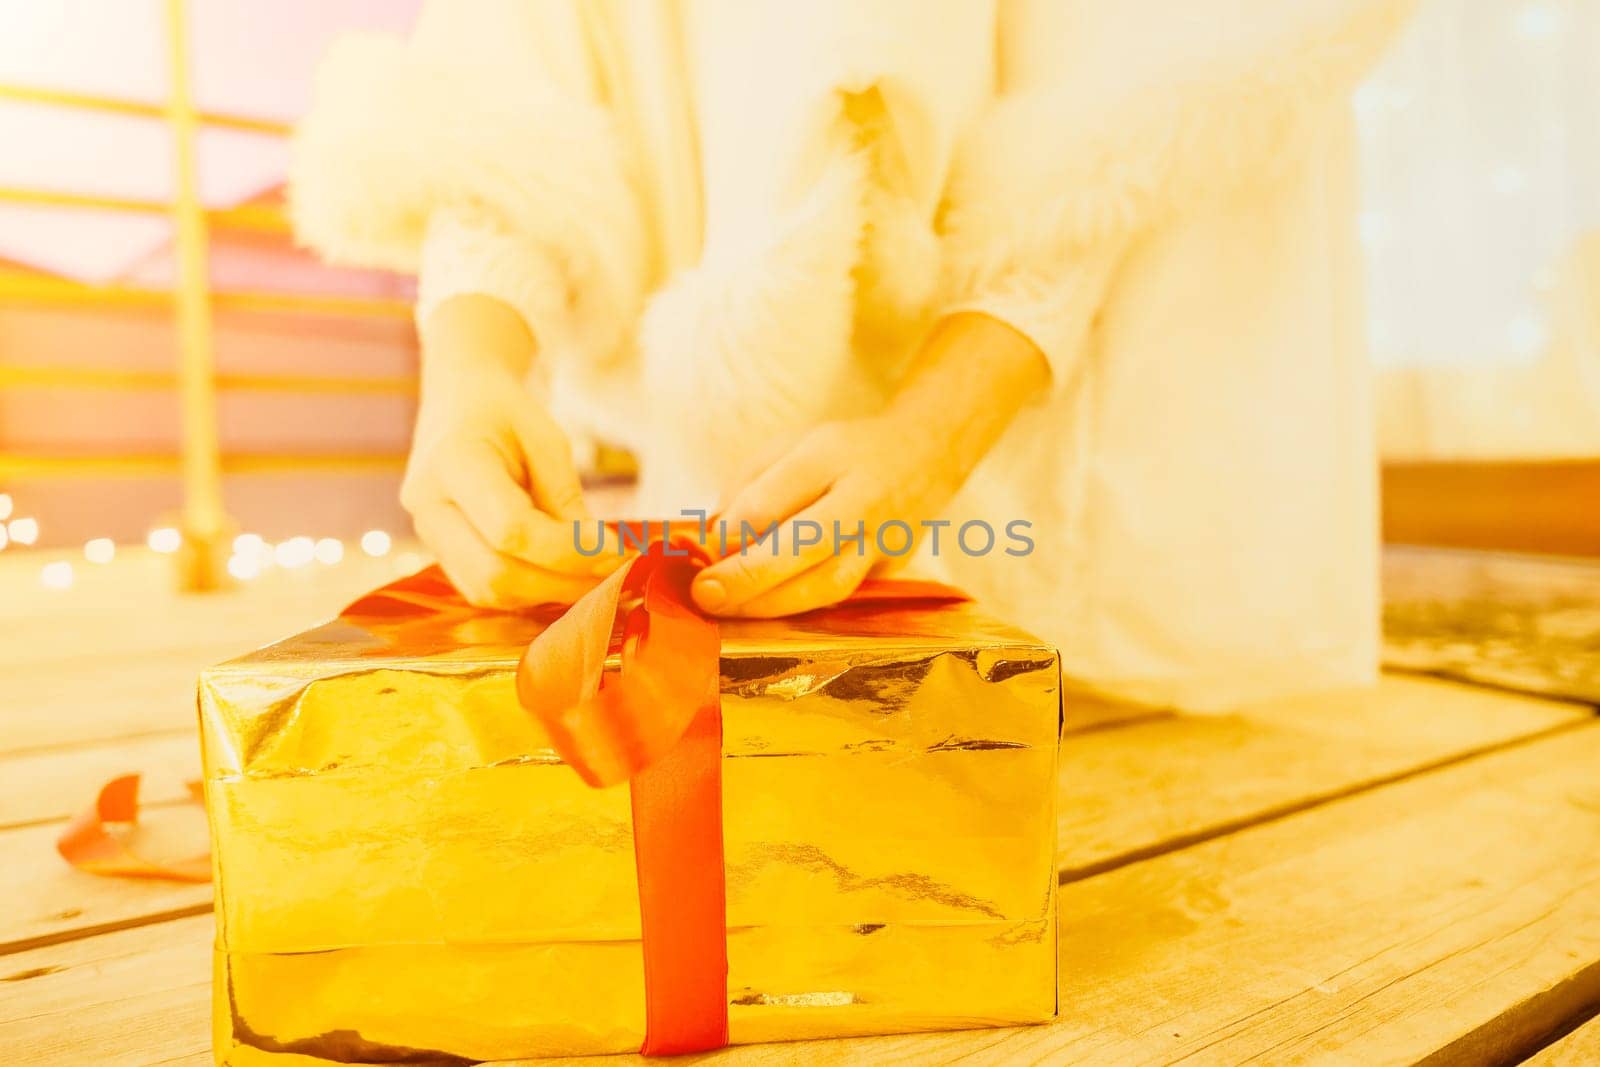 A woman in a white dress is holding a gold box with a red ribbon. She is wearing a crown on her head. The scene takes place in a room with a door and a window. The woman appears to be opening the gift box.